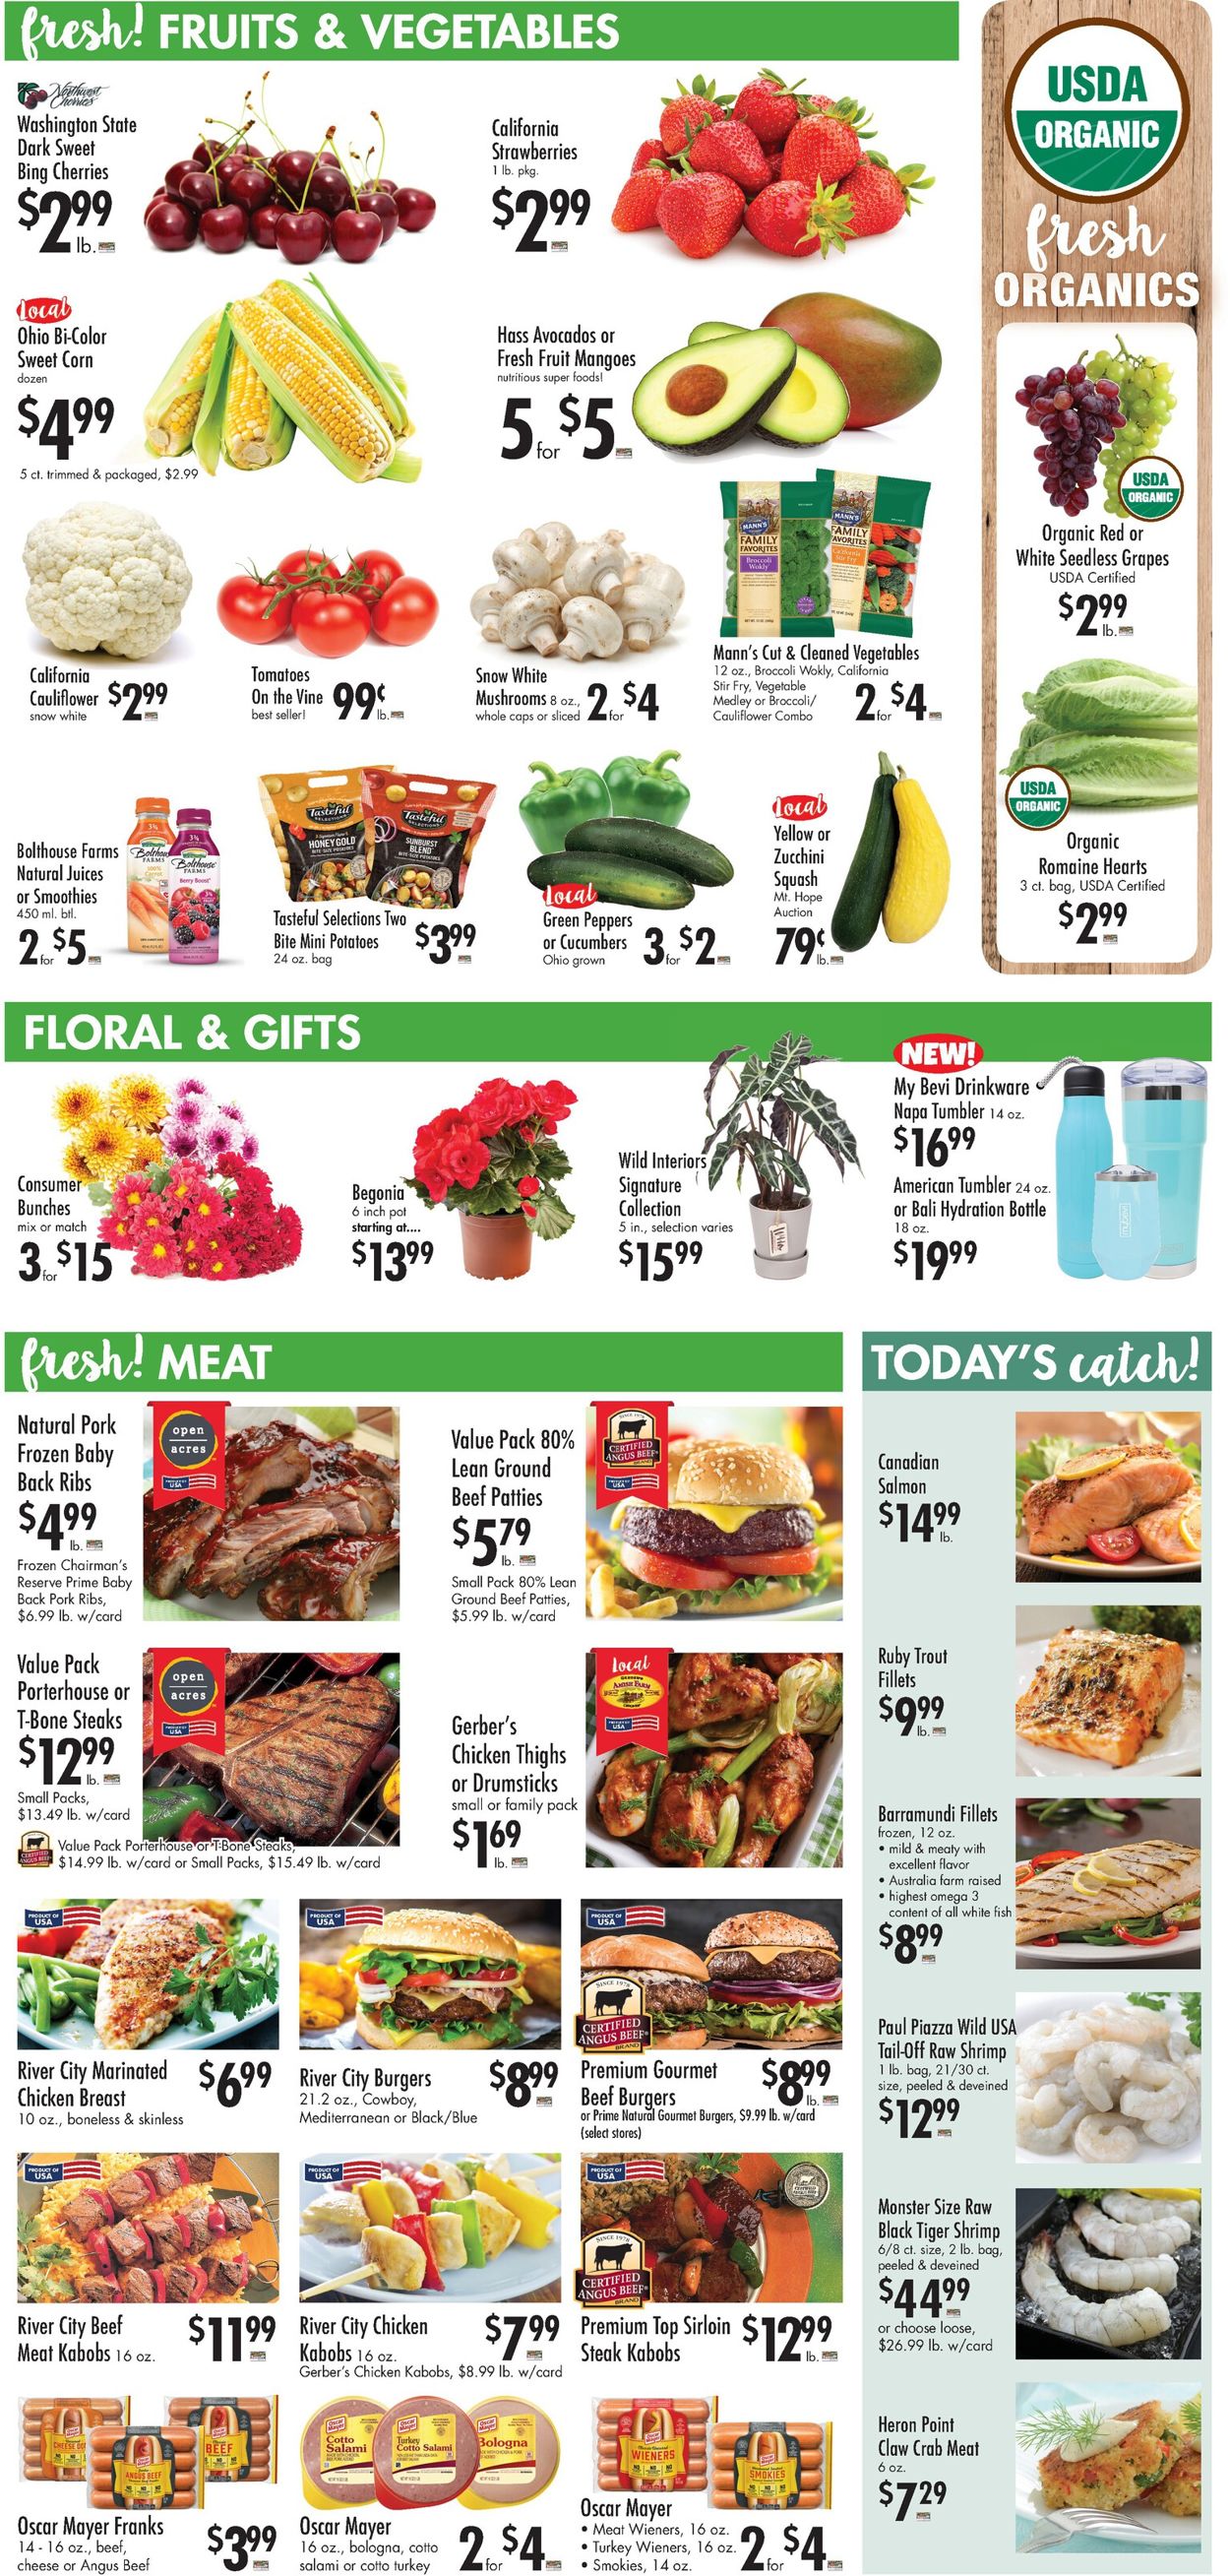 Catalogue Buehler's Fresh Foods from 07/21/2021